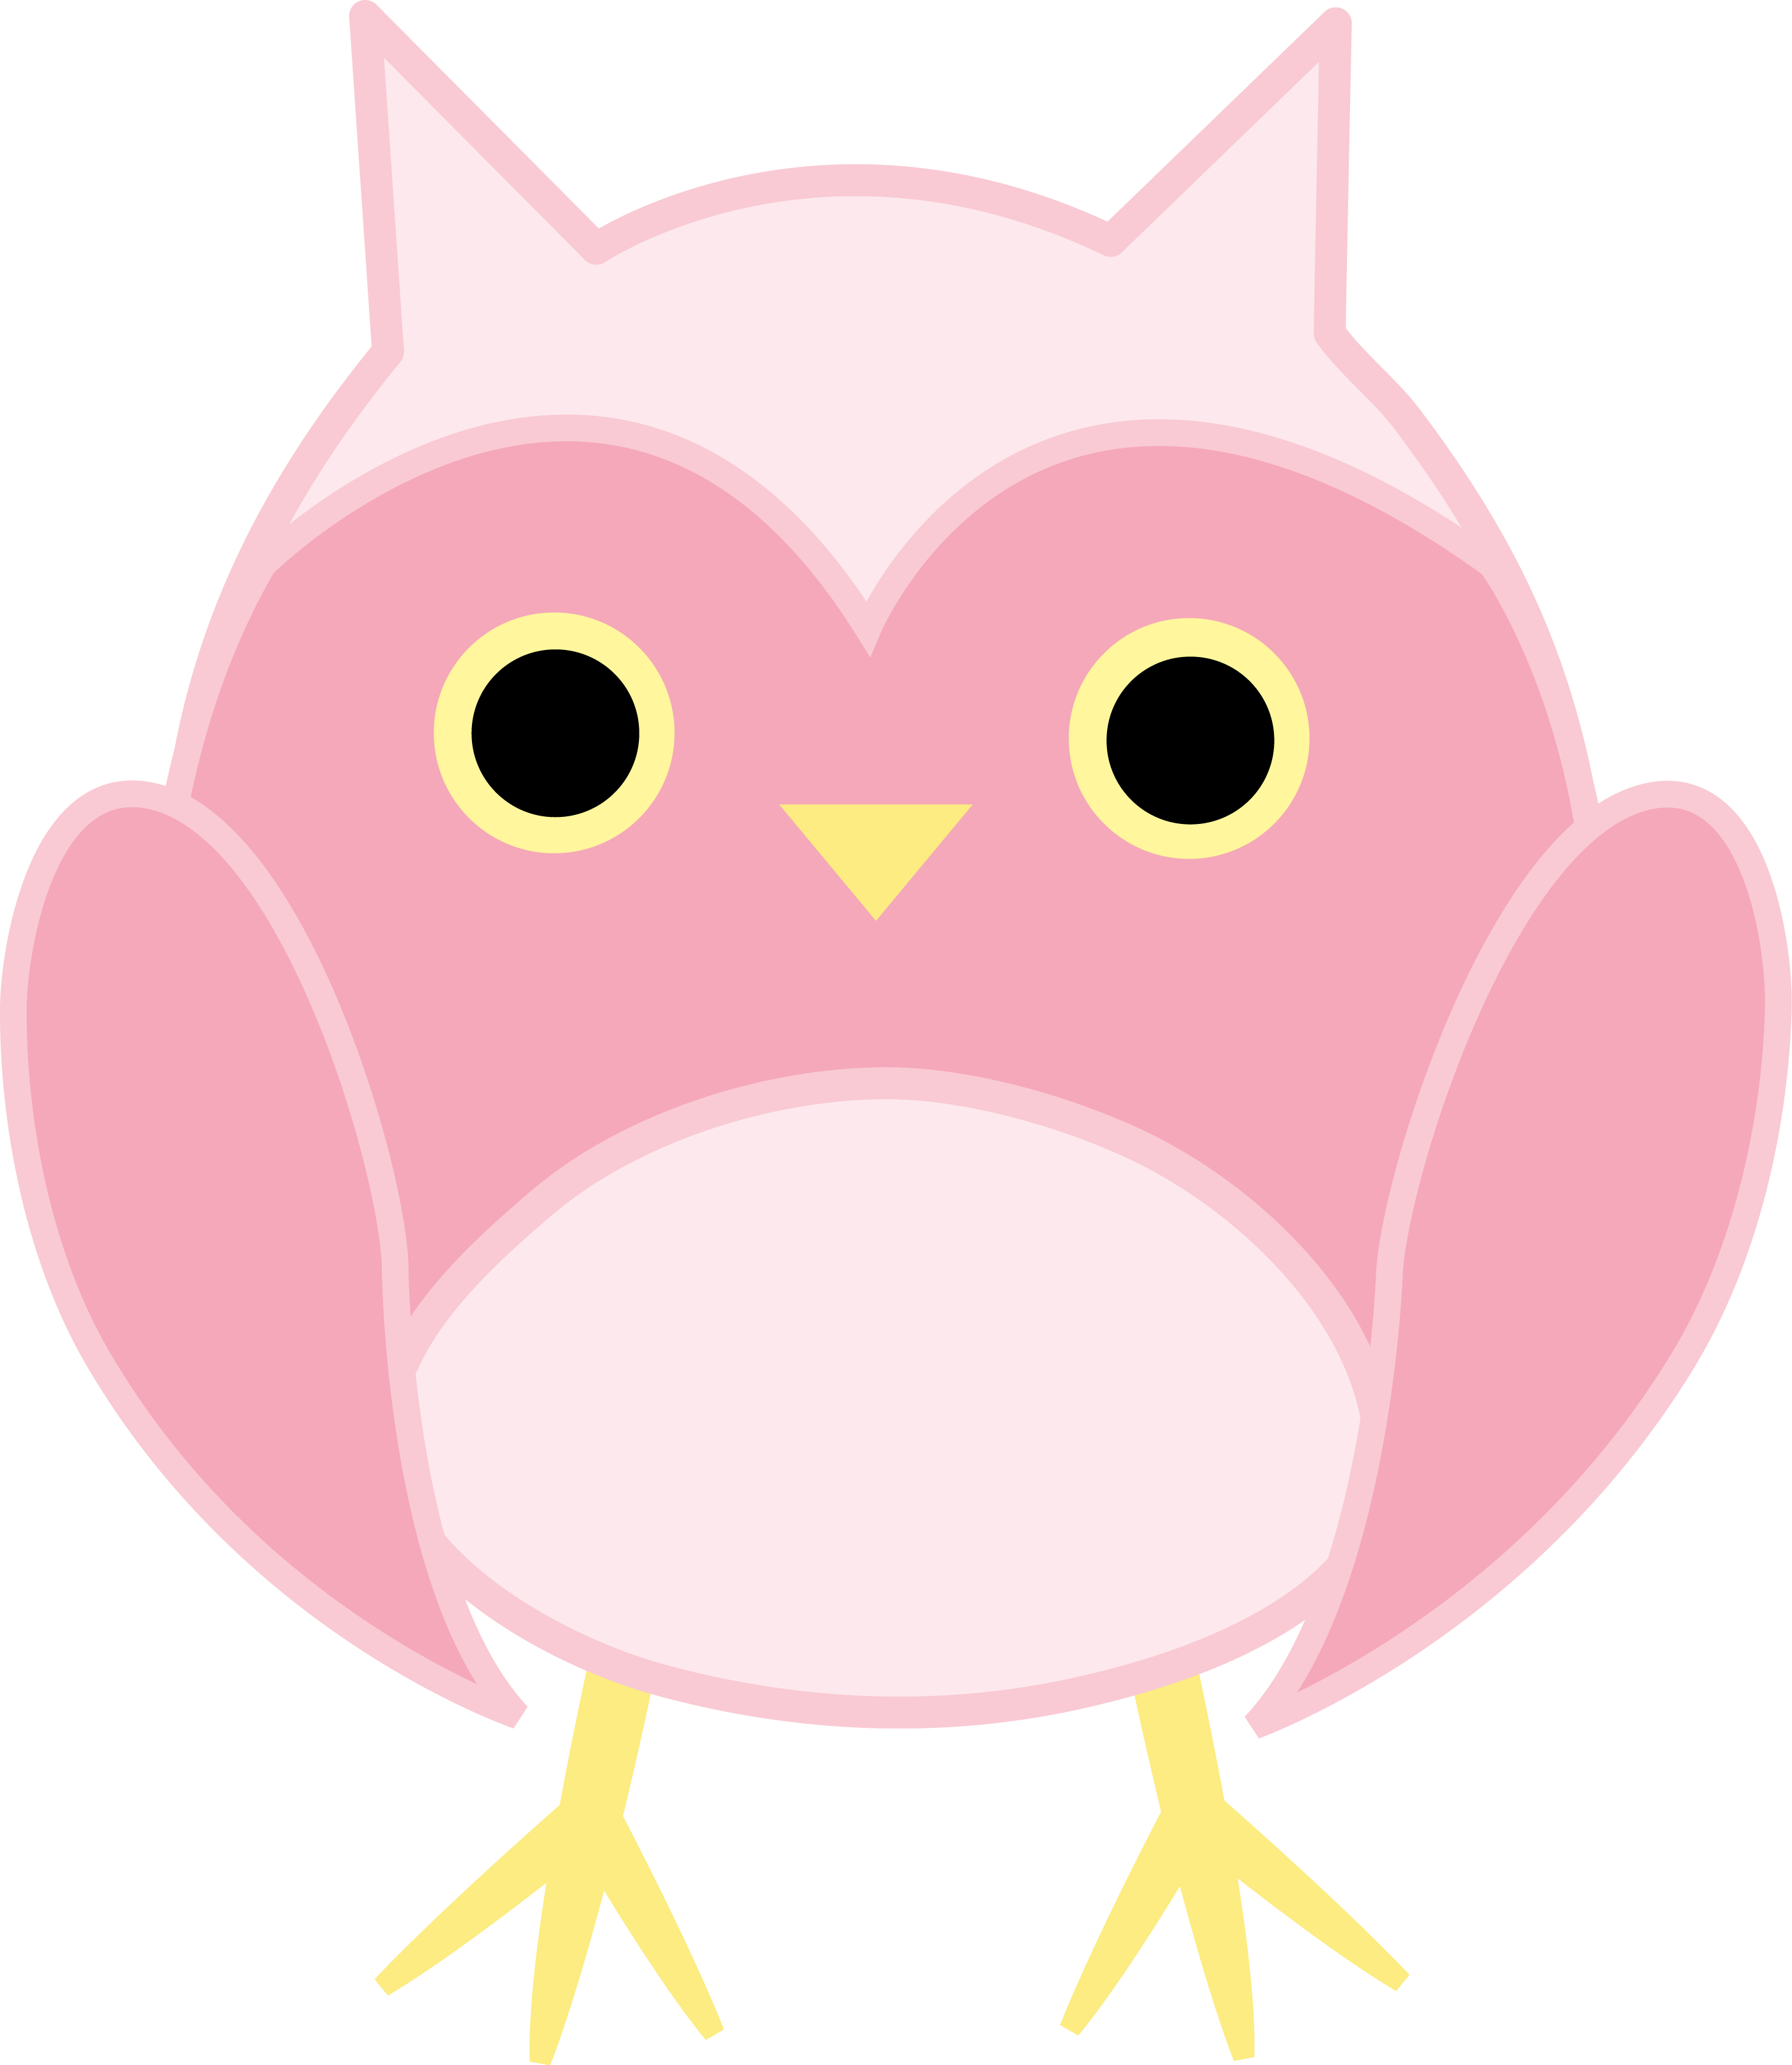 Free Pink Owl Clipart, Download Free Clip Art, Free Clip ...